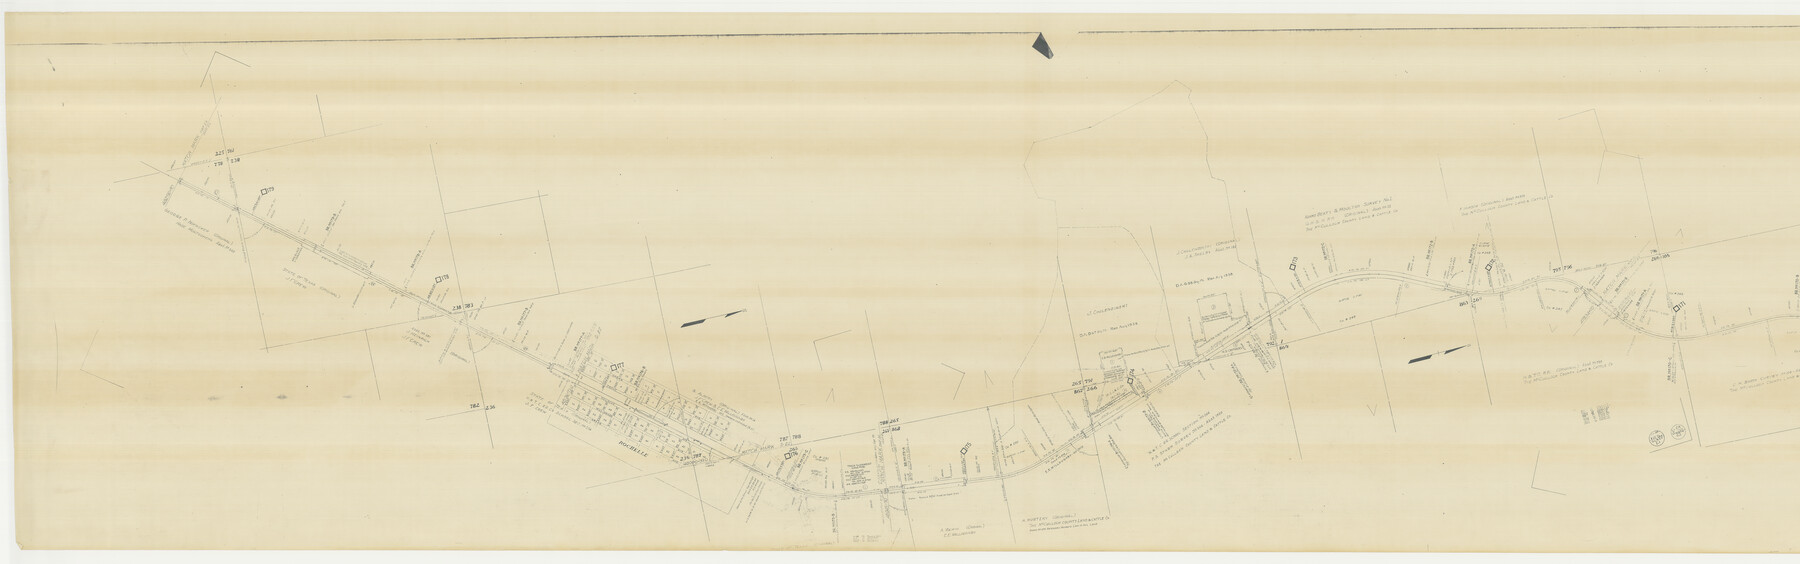 61414, [FT. W. & R. G. Ry. Right of Way Map, Winchell to Brady, McCulloch County, Texas], General Map Collection